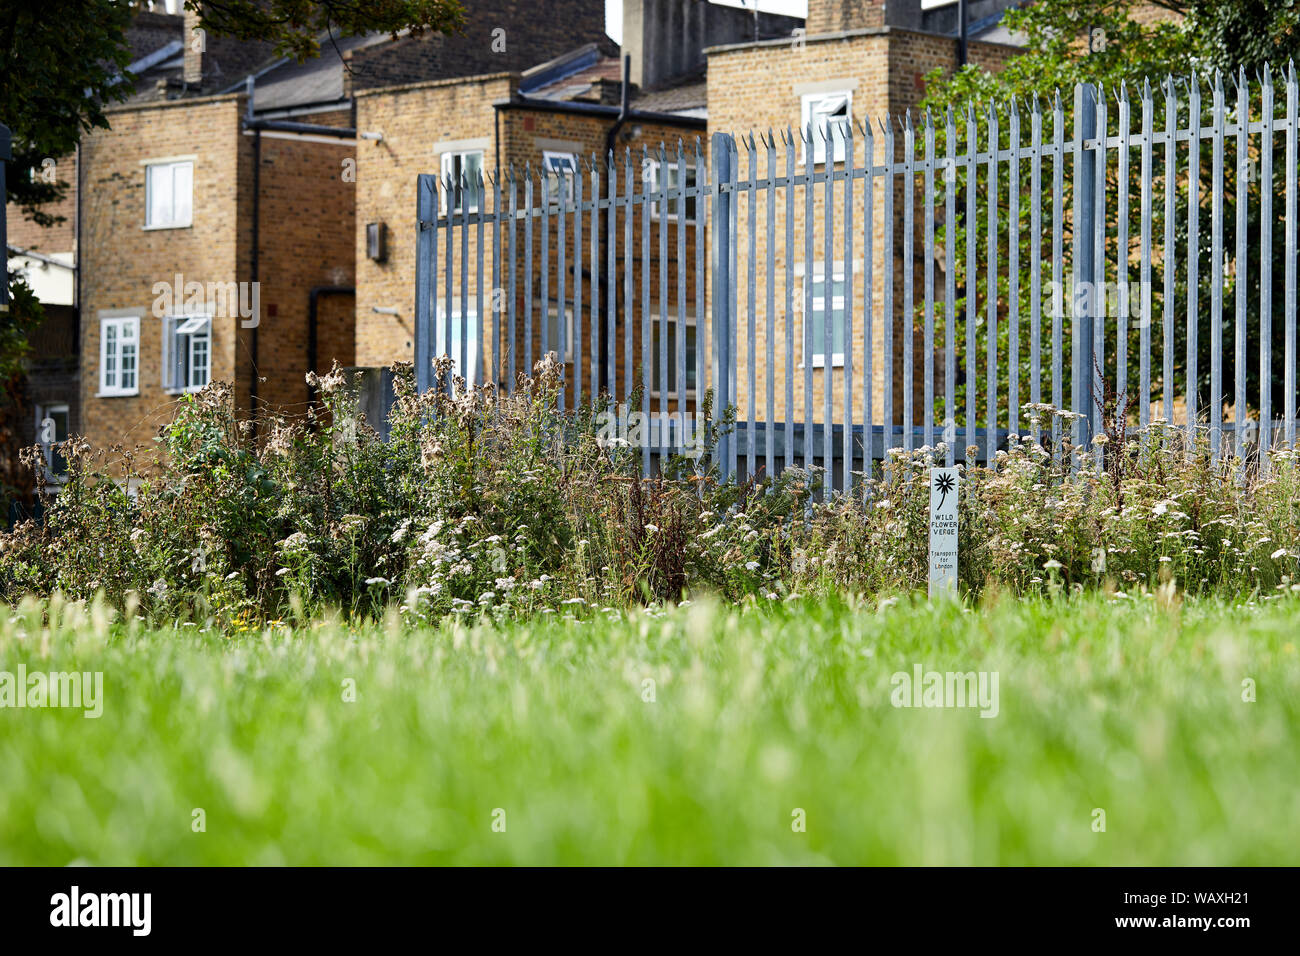 London, U.K. - August 17, 2019: A roadside verge left for wildflower growth managed by Transport for London to increase biodiversity across the capita Stock Photo